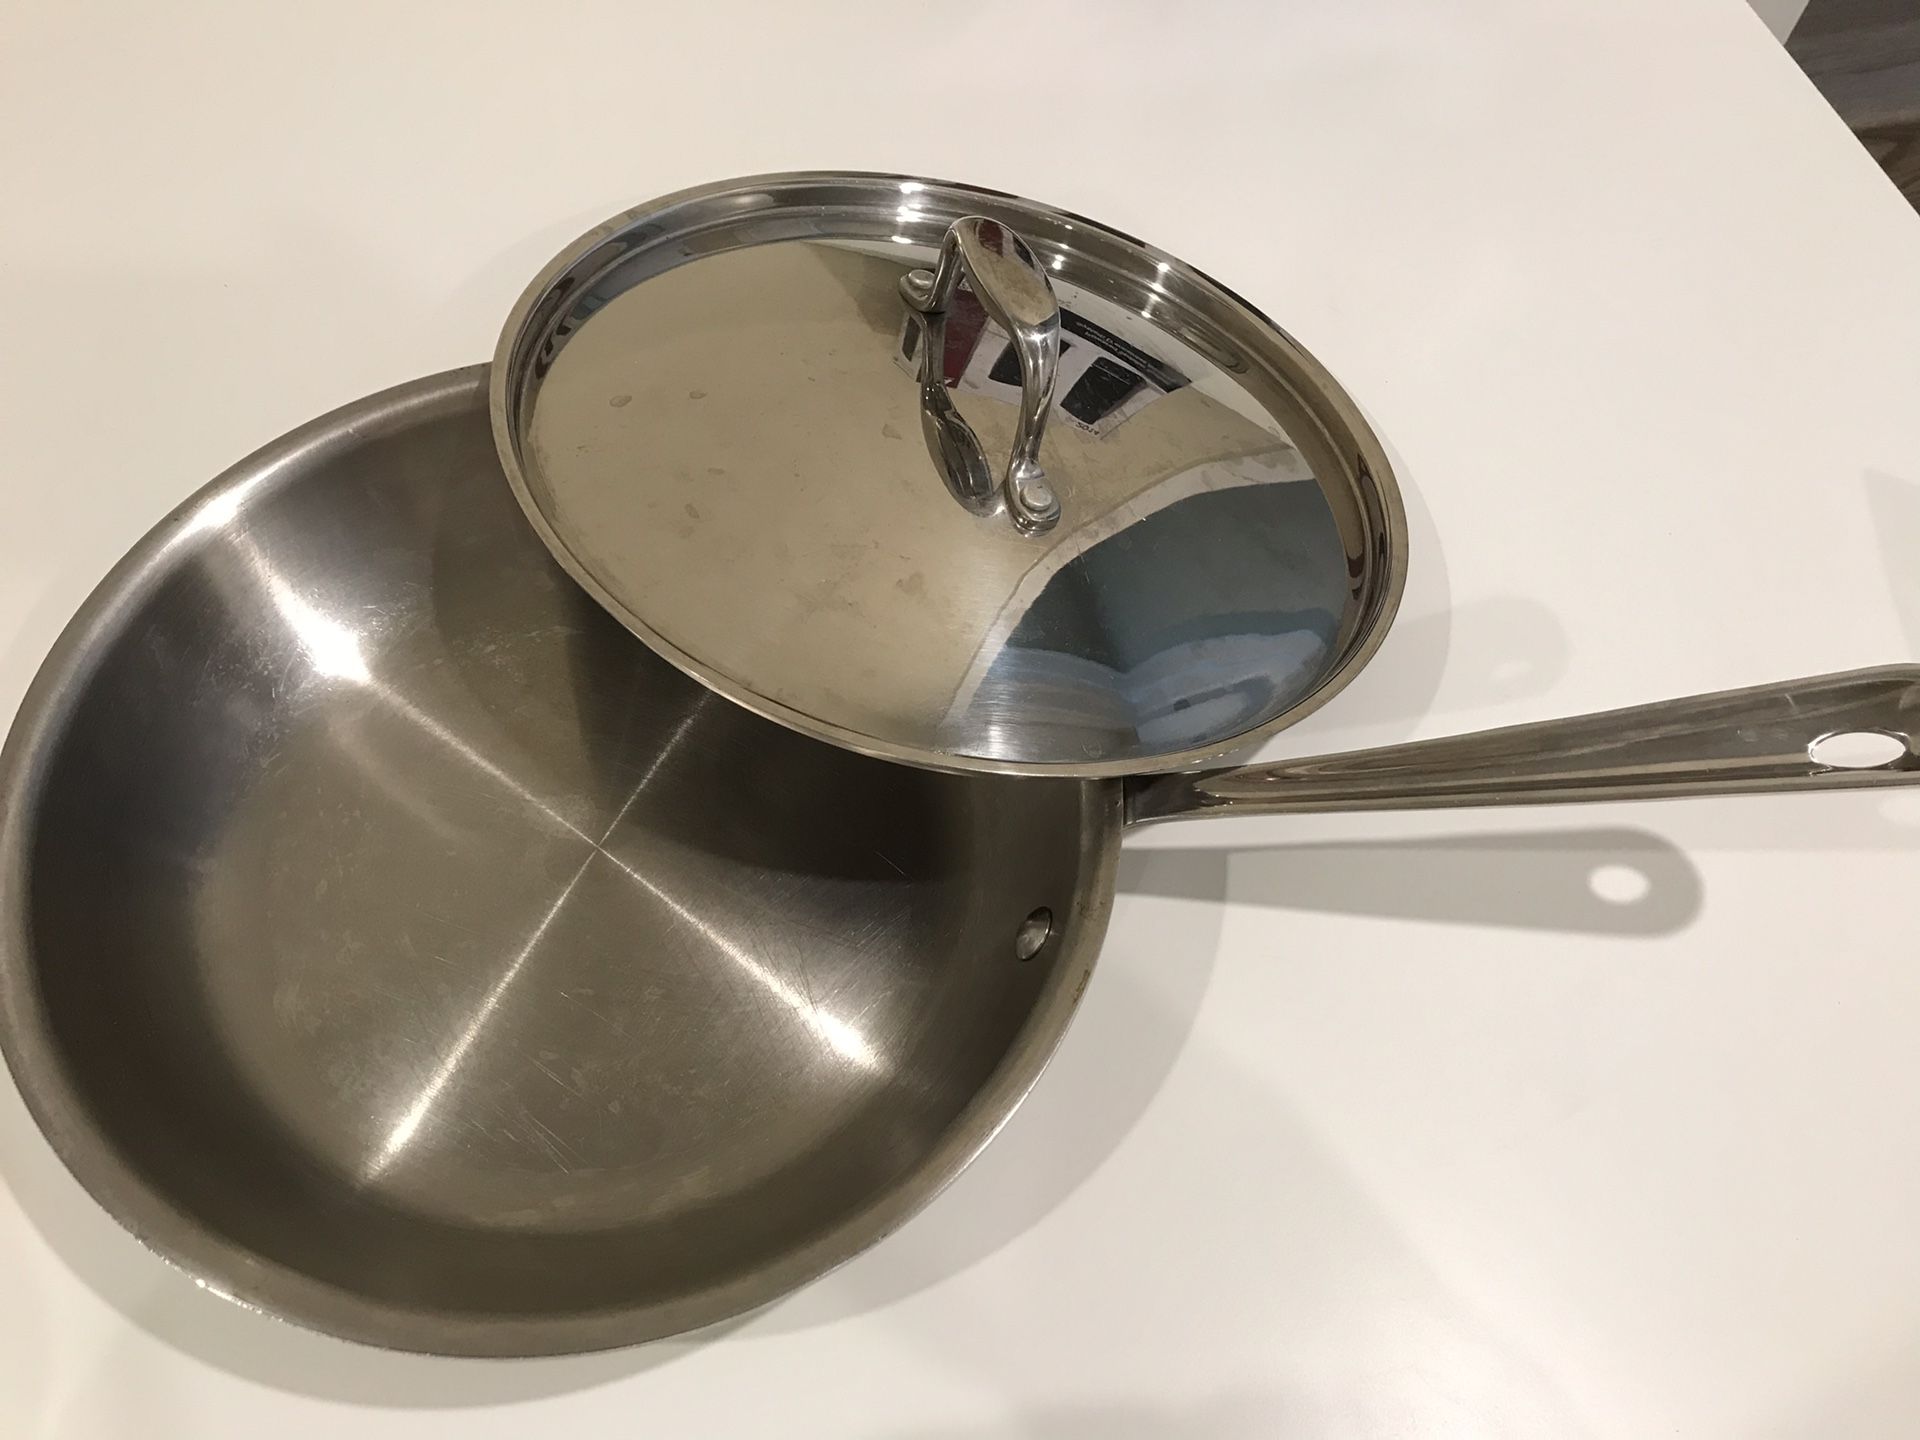 Pan w/ Cover & Cup for free